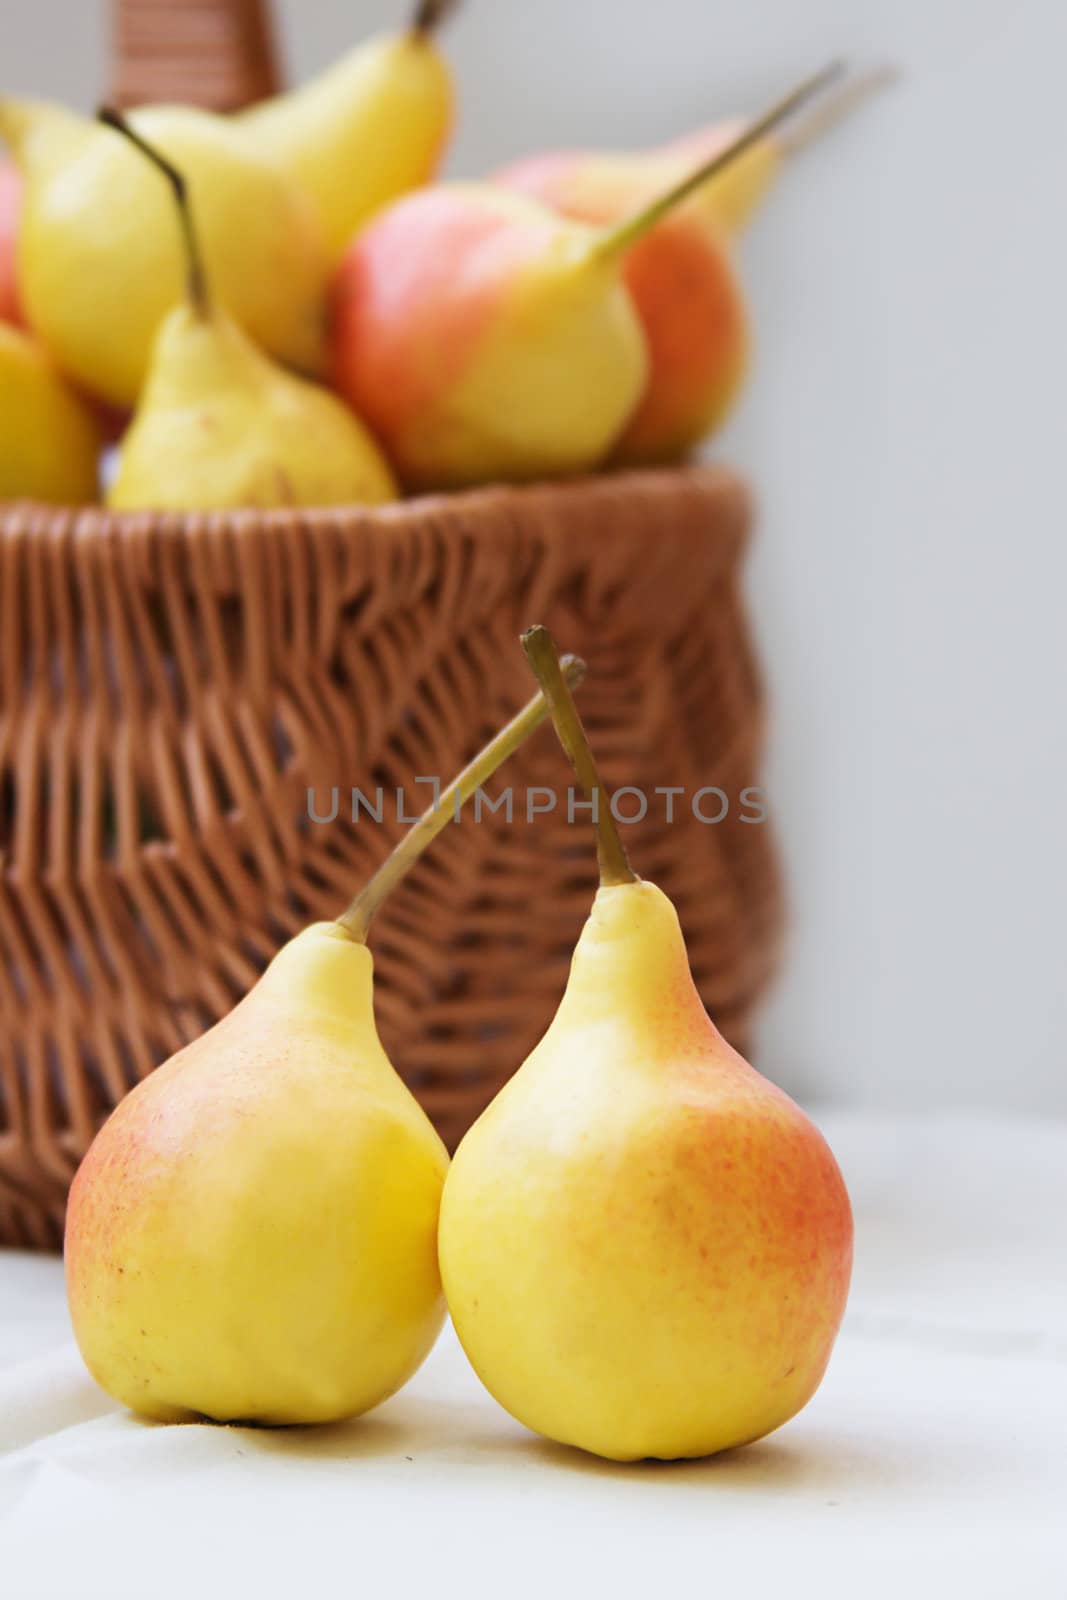 Some yellow pears in basket by Angel_a